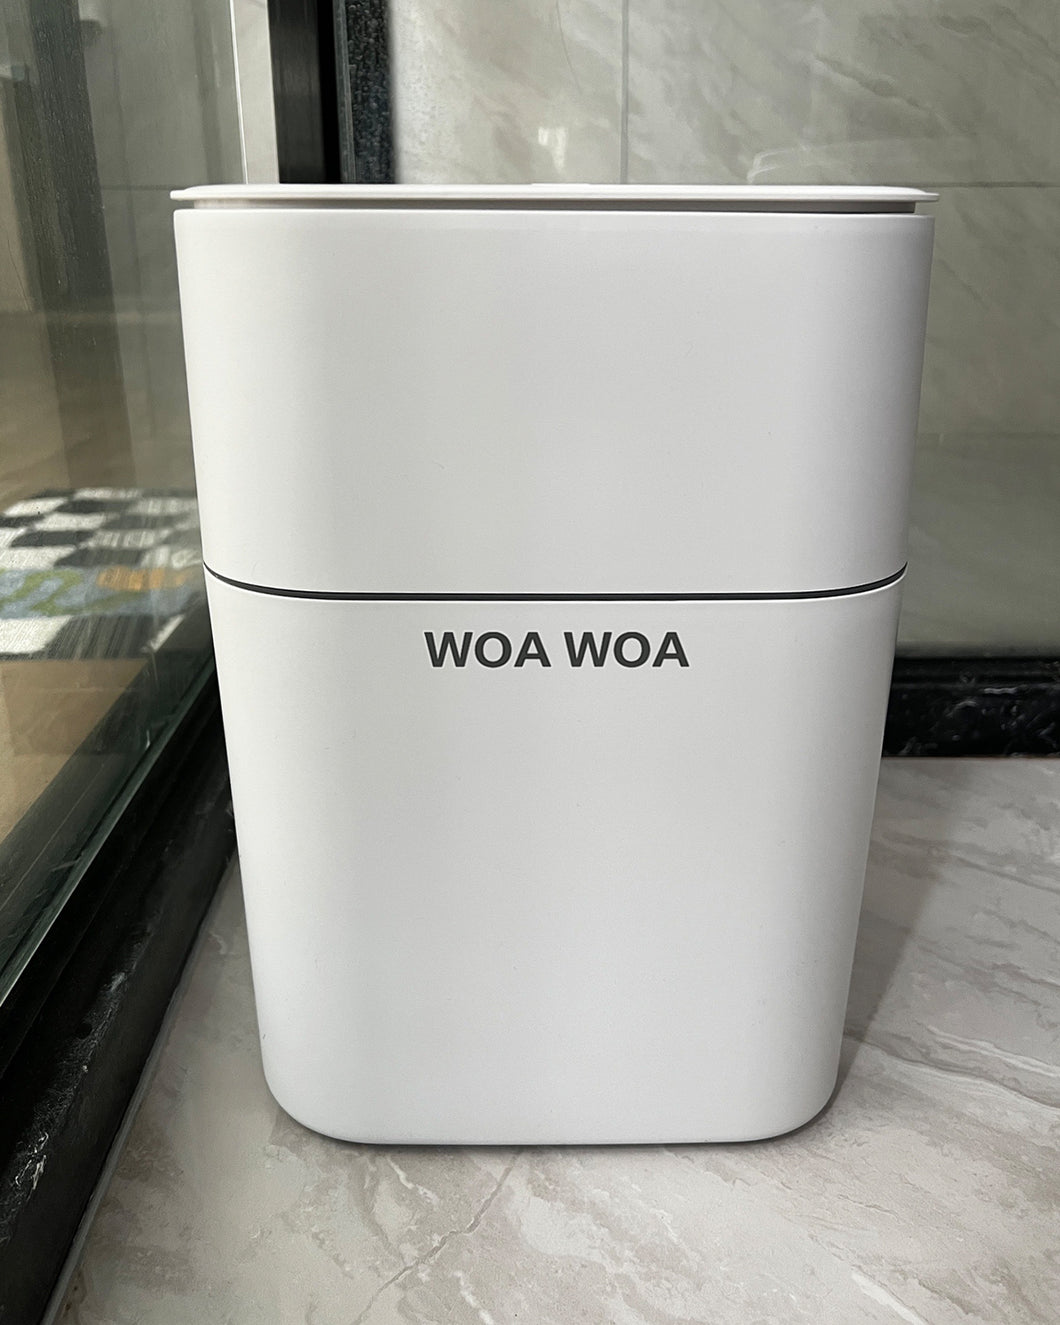 WOA WOA garbage can,Liter Slim Plastic Trash Can with Lid, White Modern Garbage Container Bin